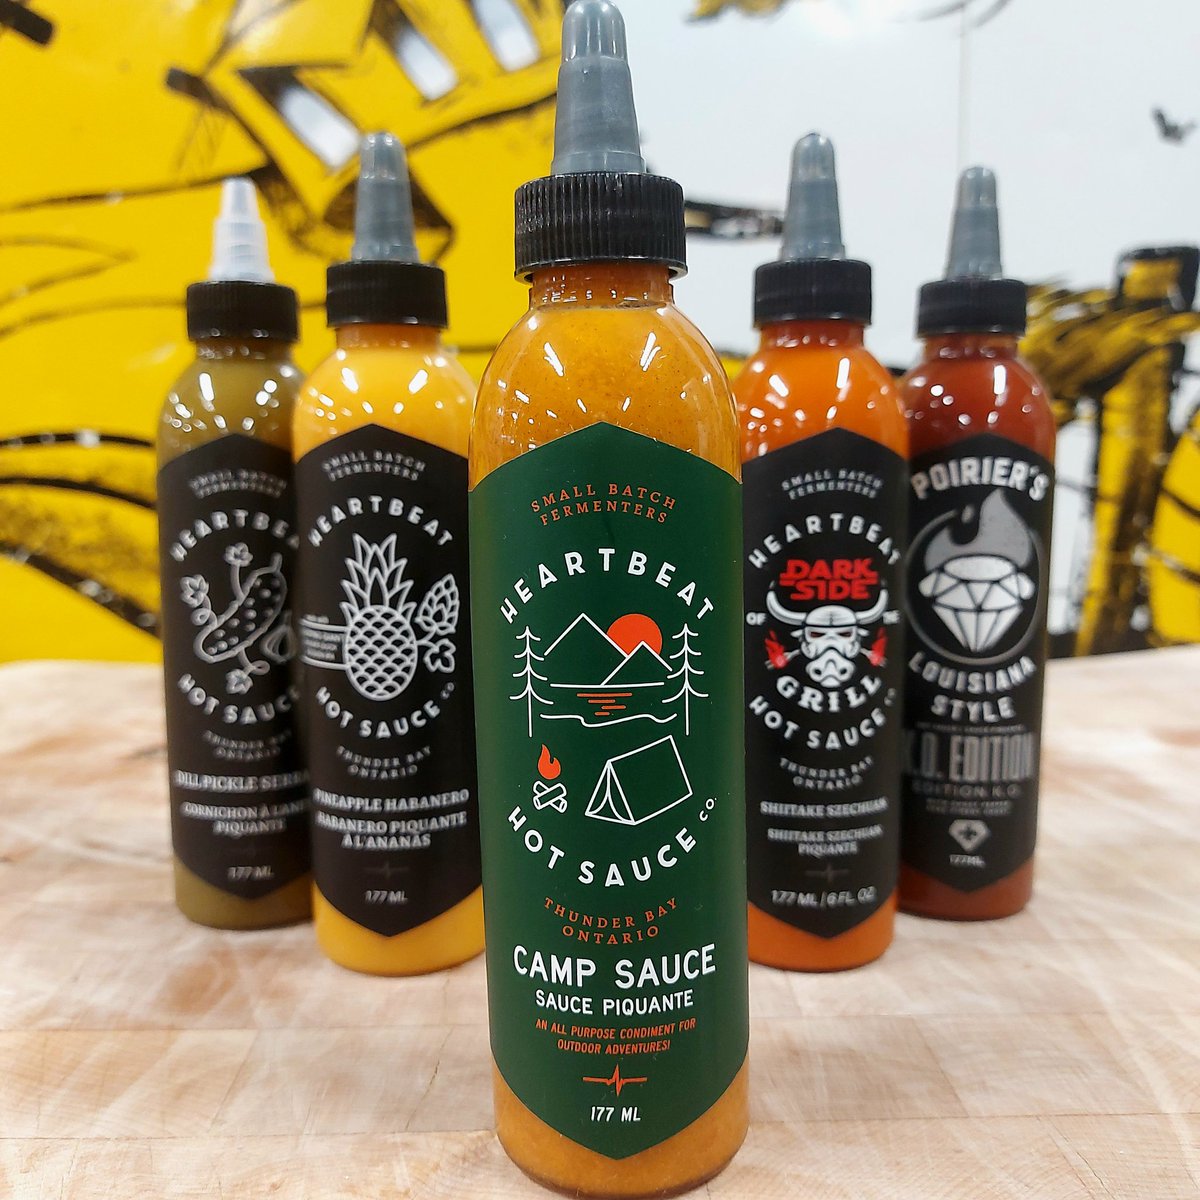 We have a new member to the Heartbeat Hot Sauce lineup! Campsauce has just the perfect mix of heat & flavour to enhance wings, chips, or just about anything! #AcmeMeatMarket #yegfood #yeg